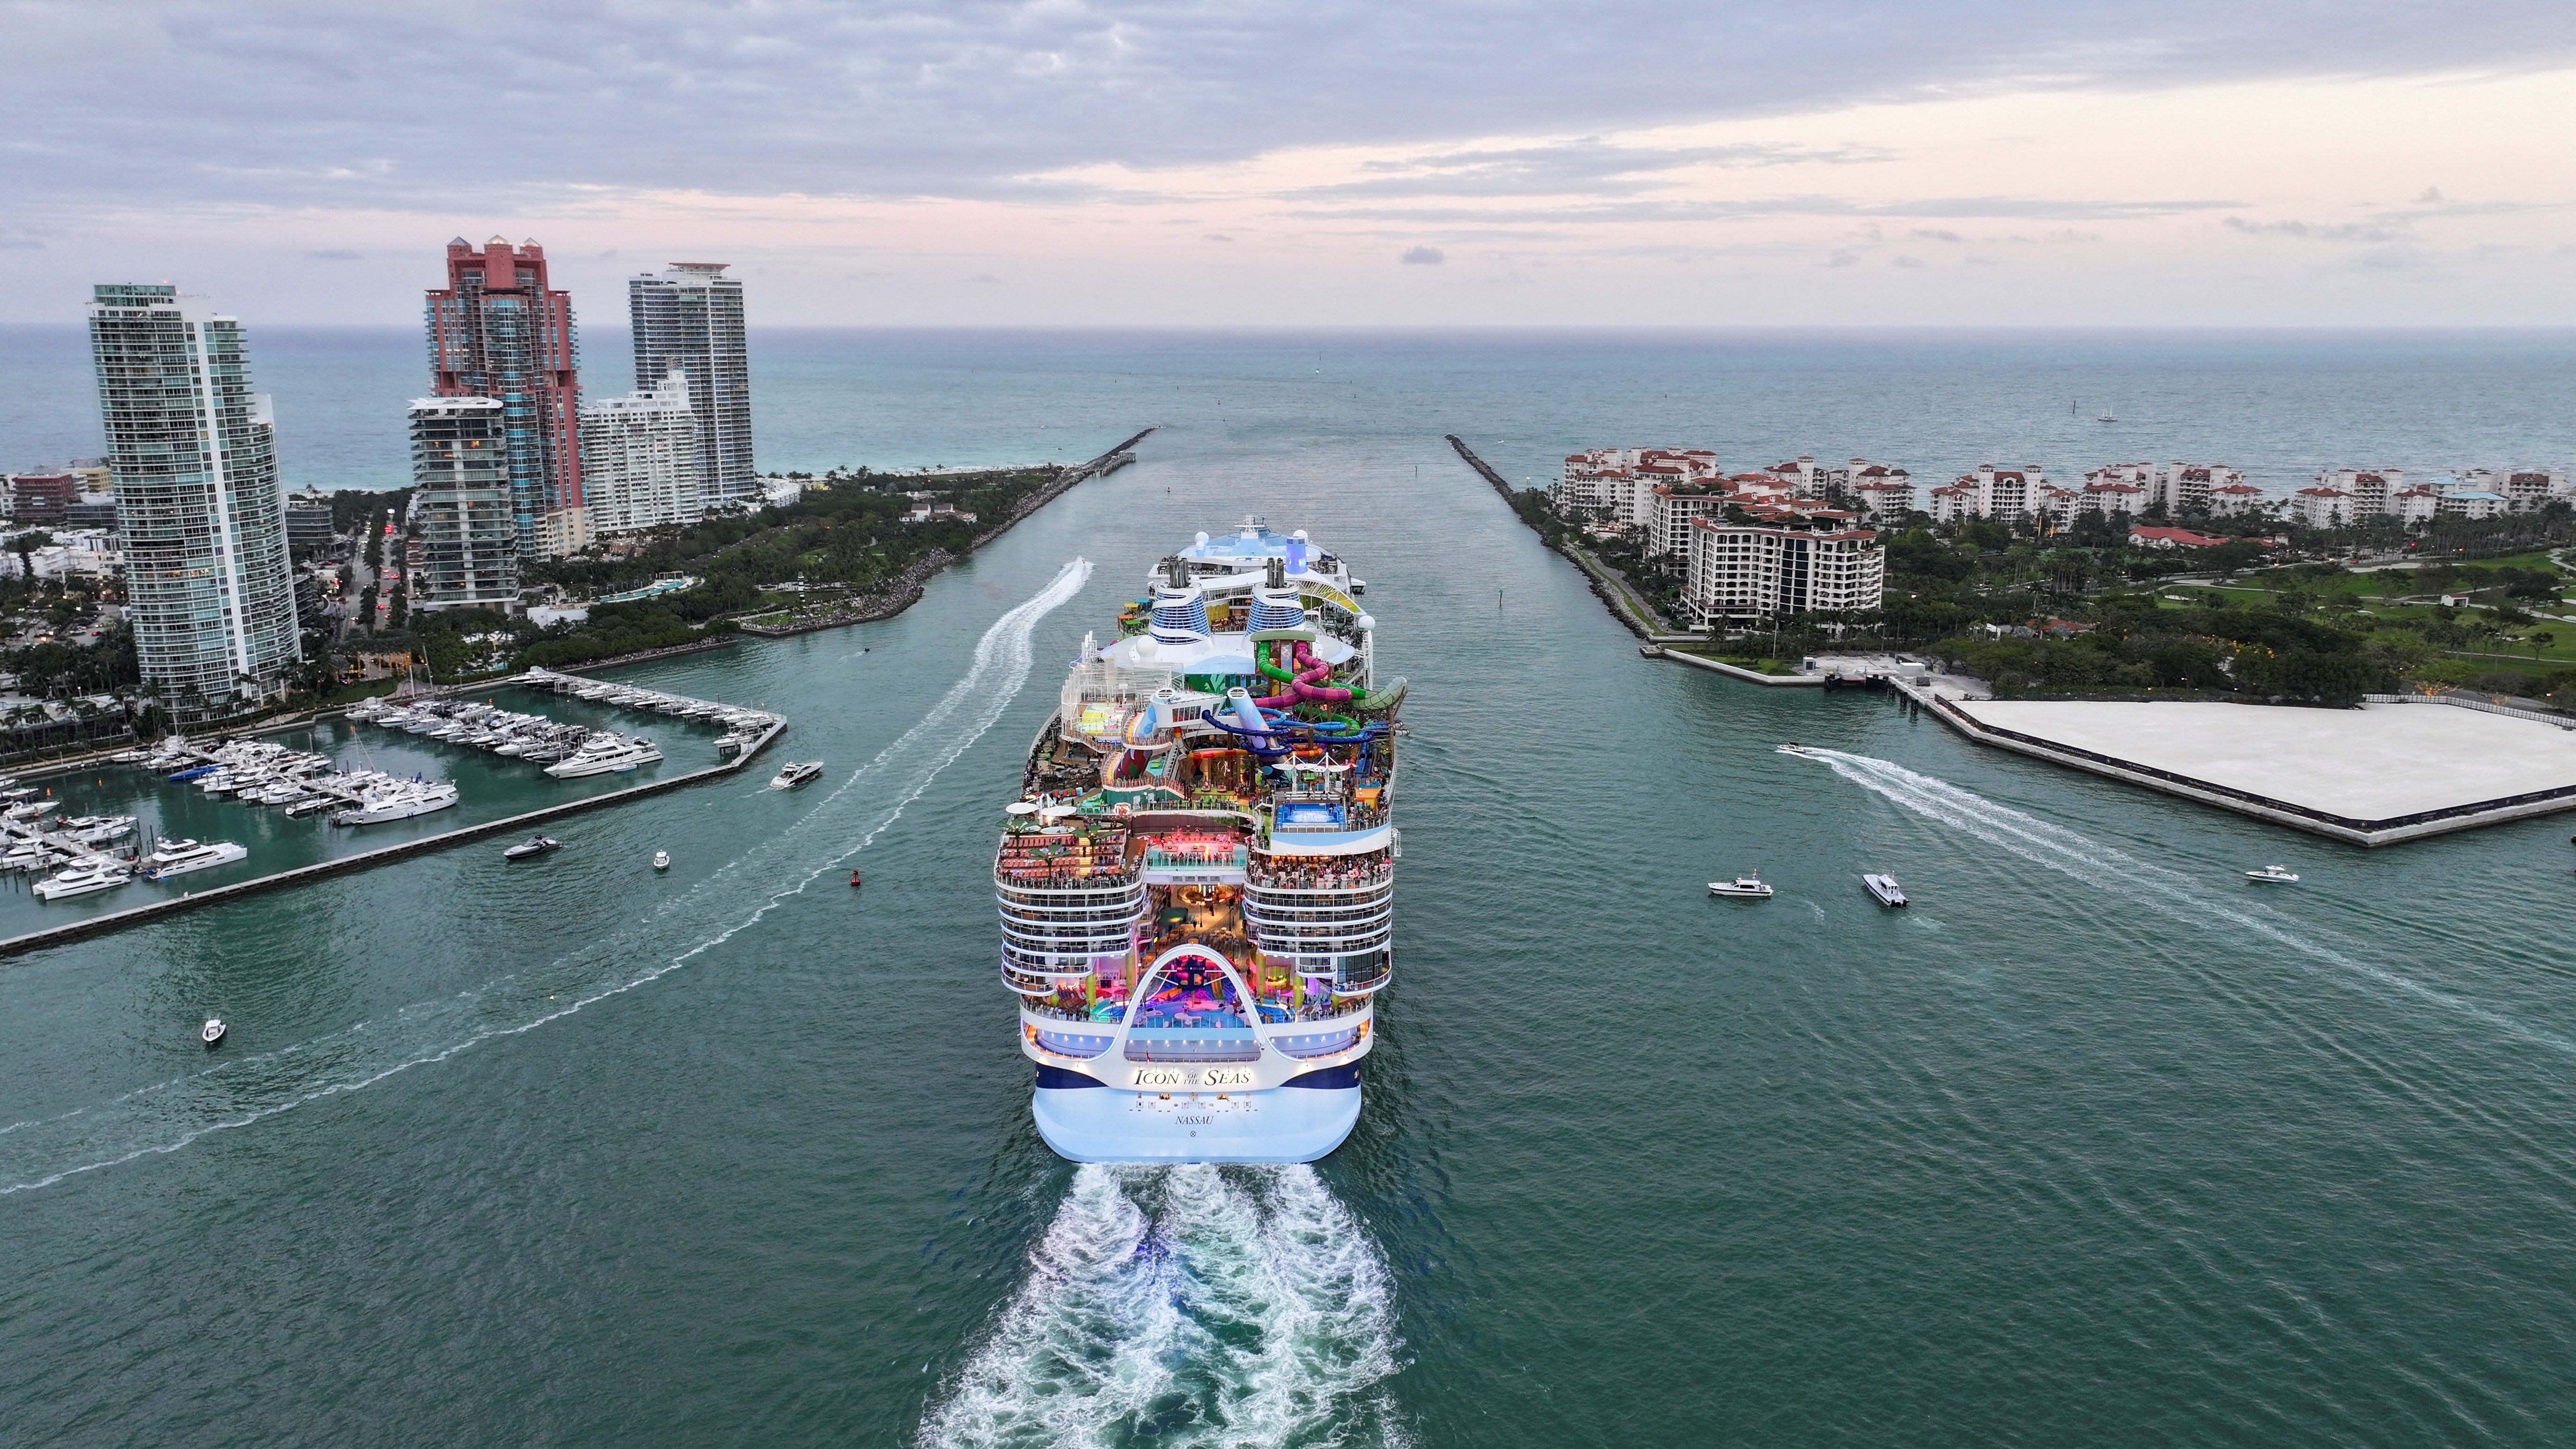 Royal Caribbean's Icon of the Seas, the largest cruise ship, in the world sets sail for its inaugural voyage with passengers, in Miami